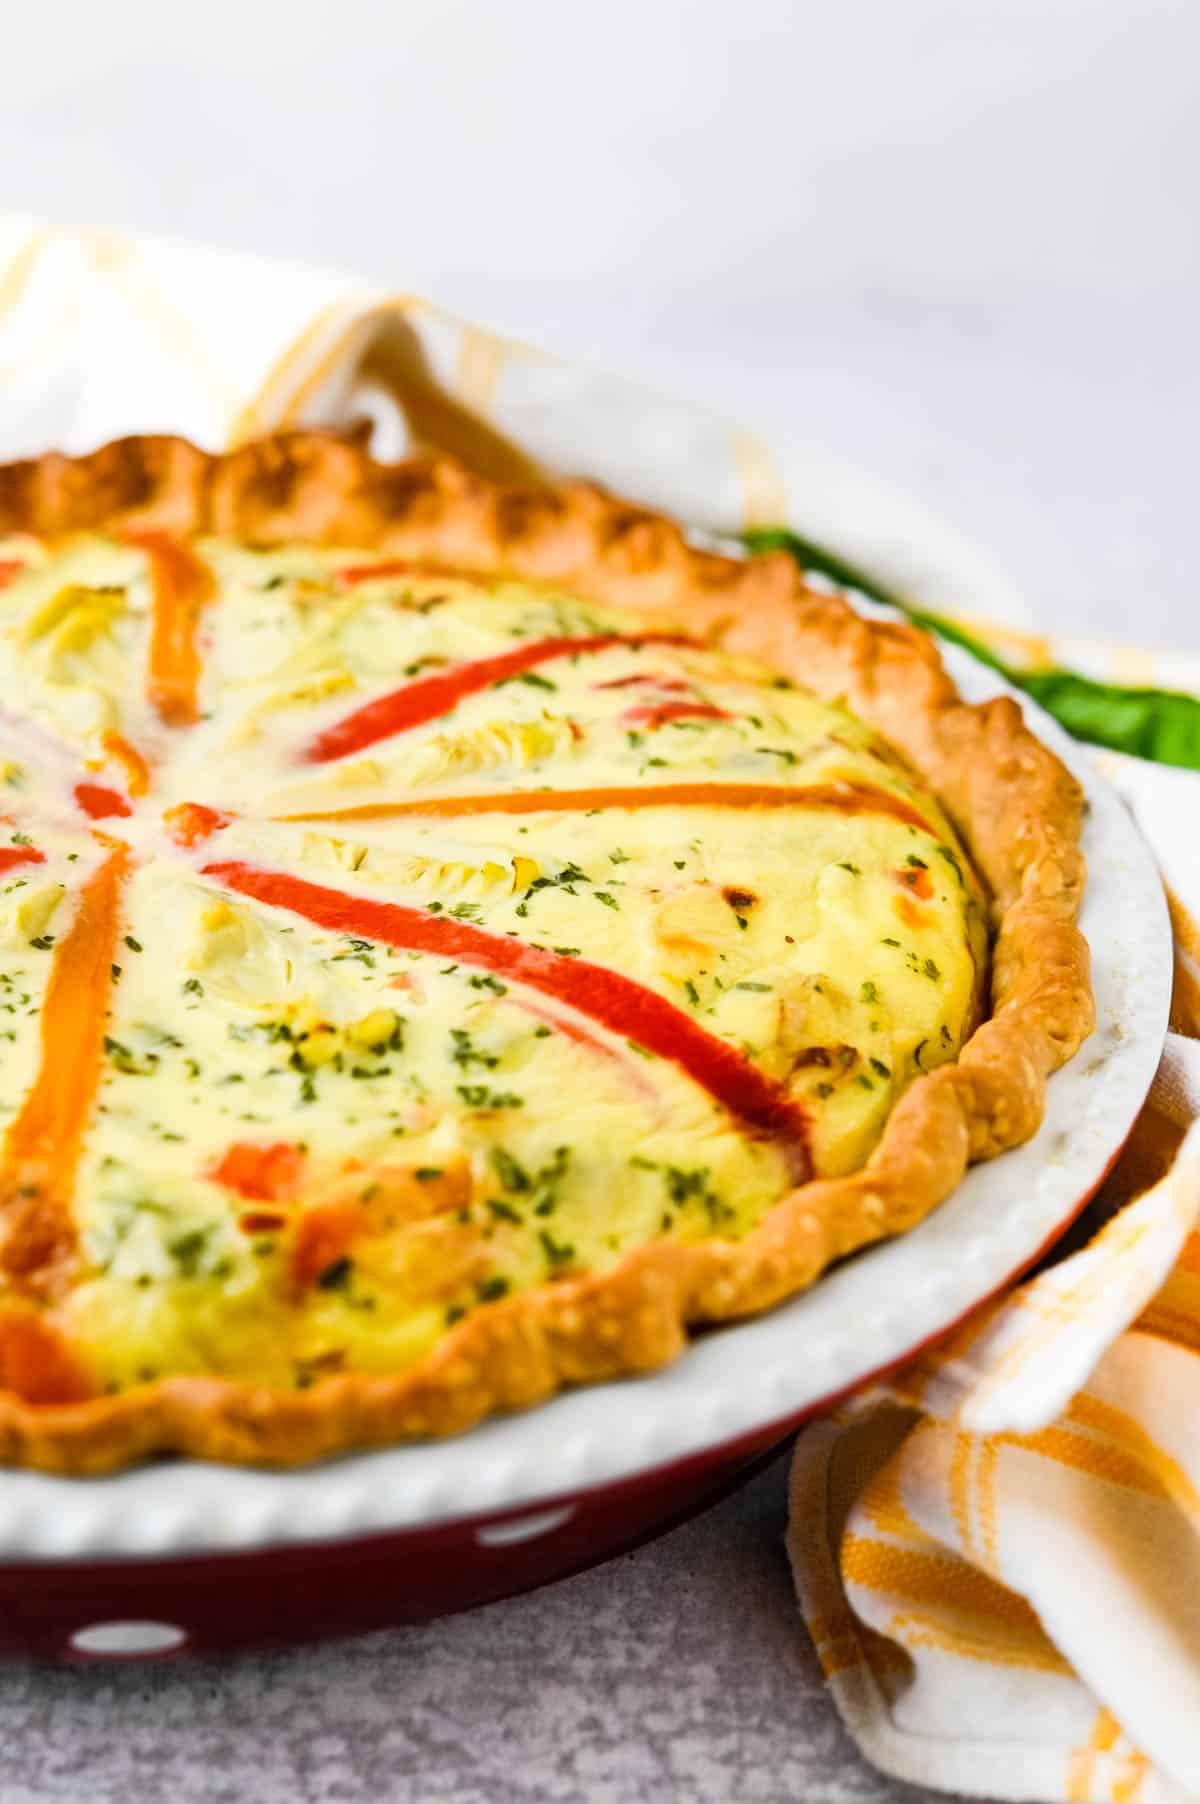 The bell pepper and artichoke quiche hot from the oven.